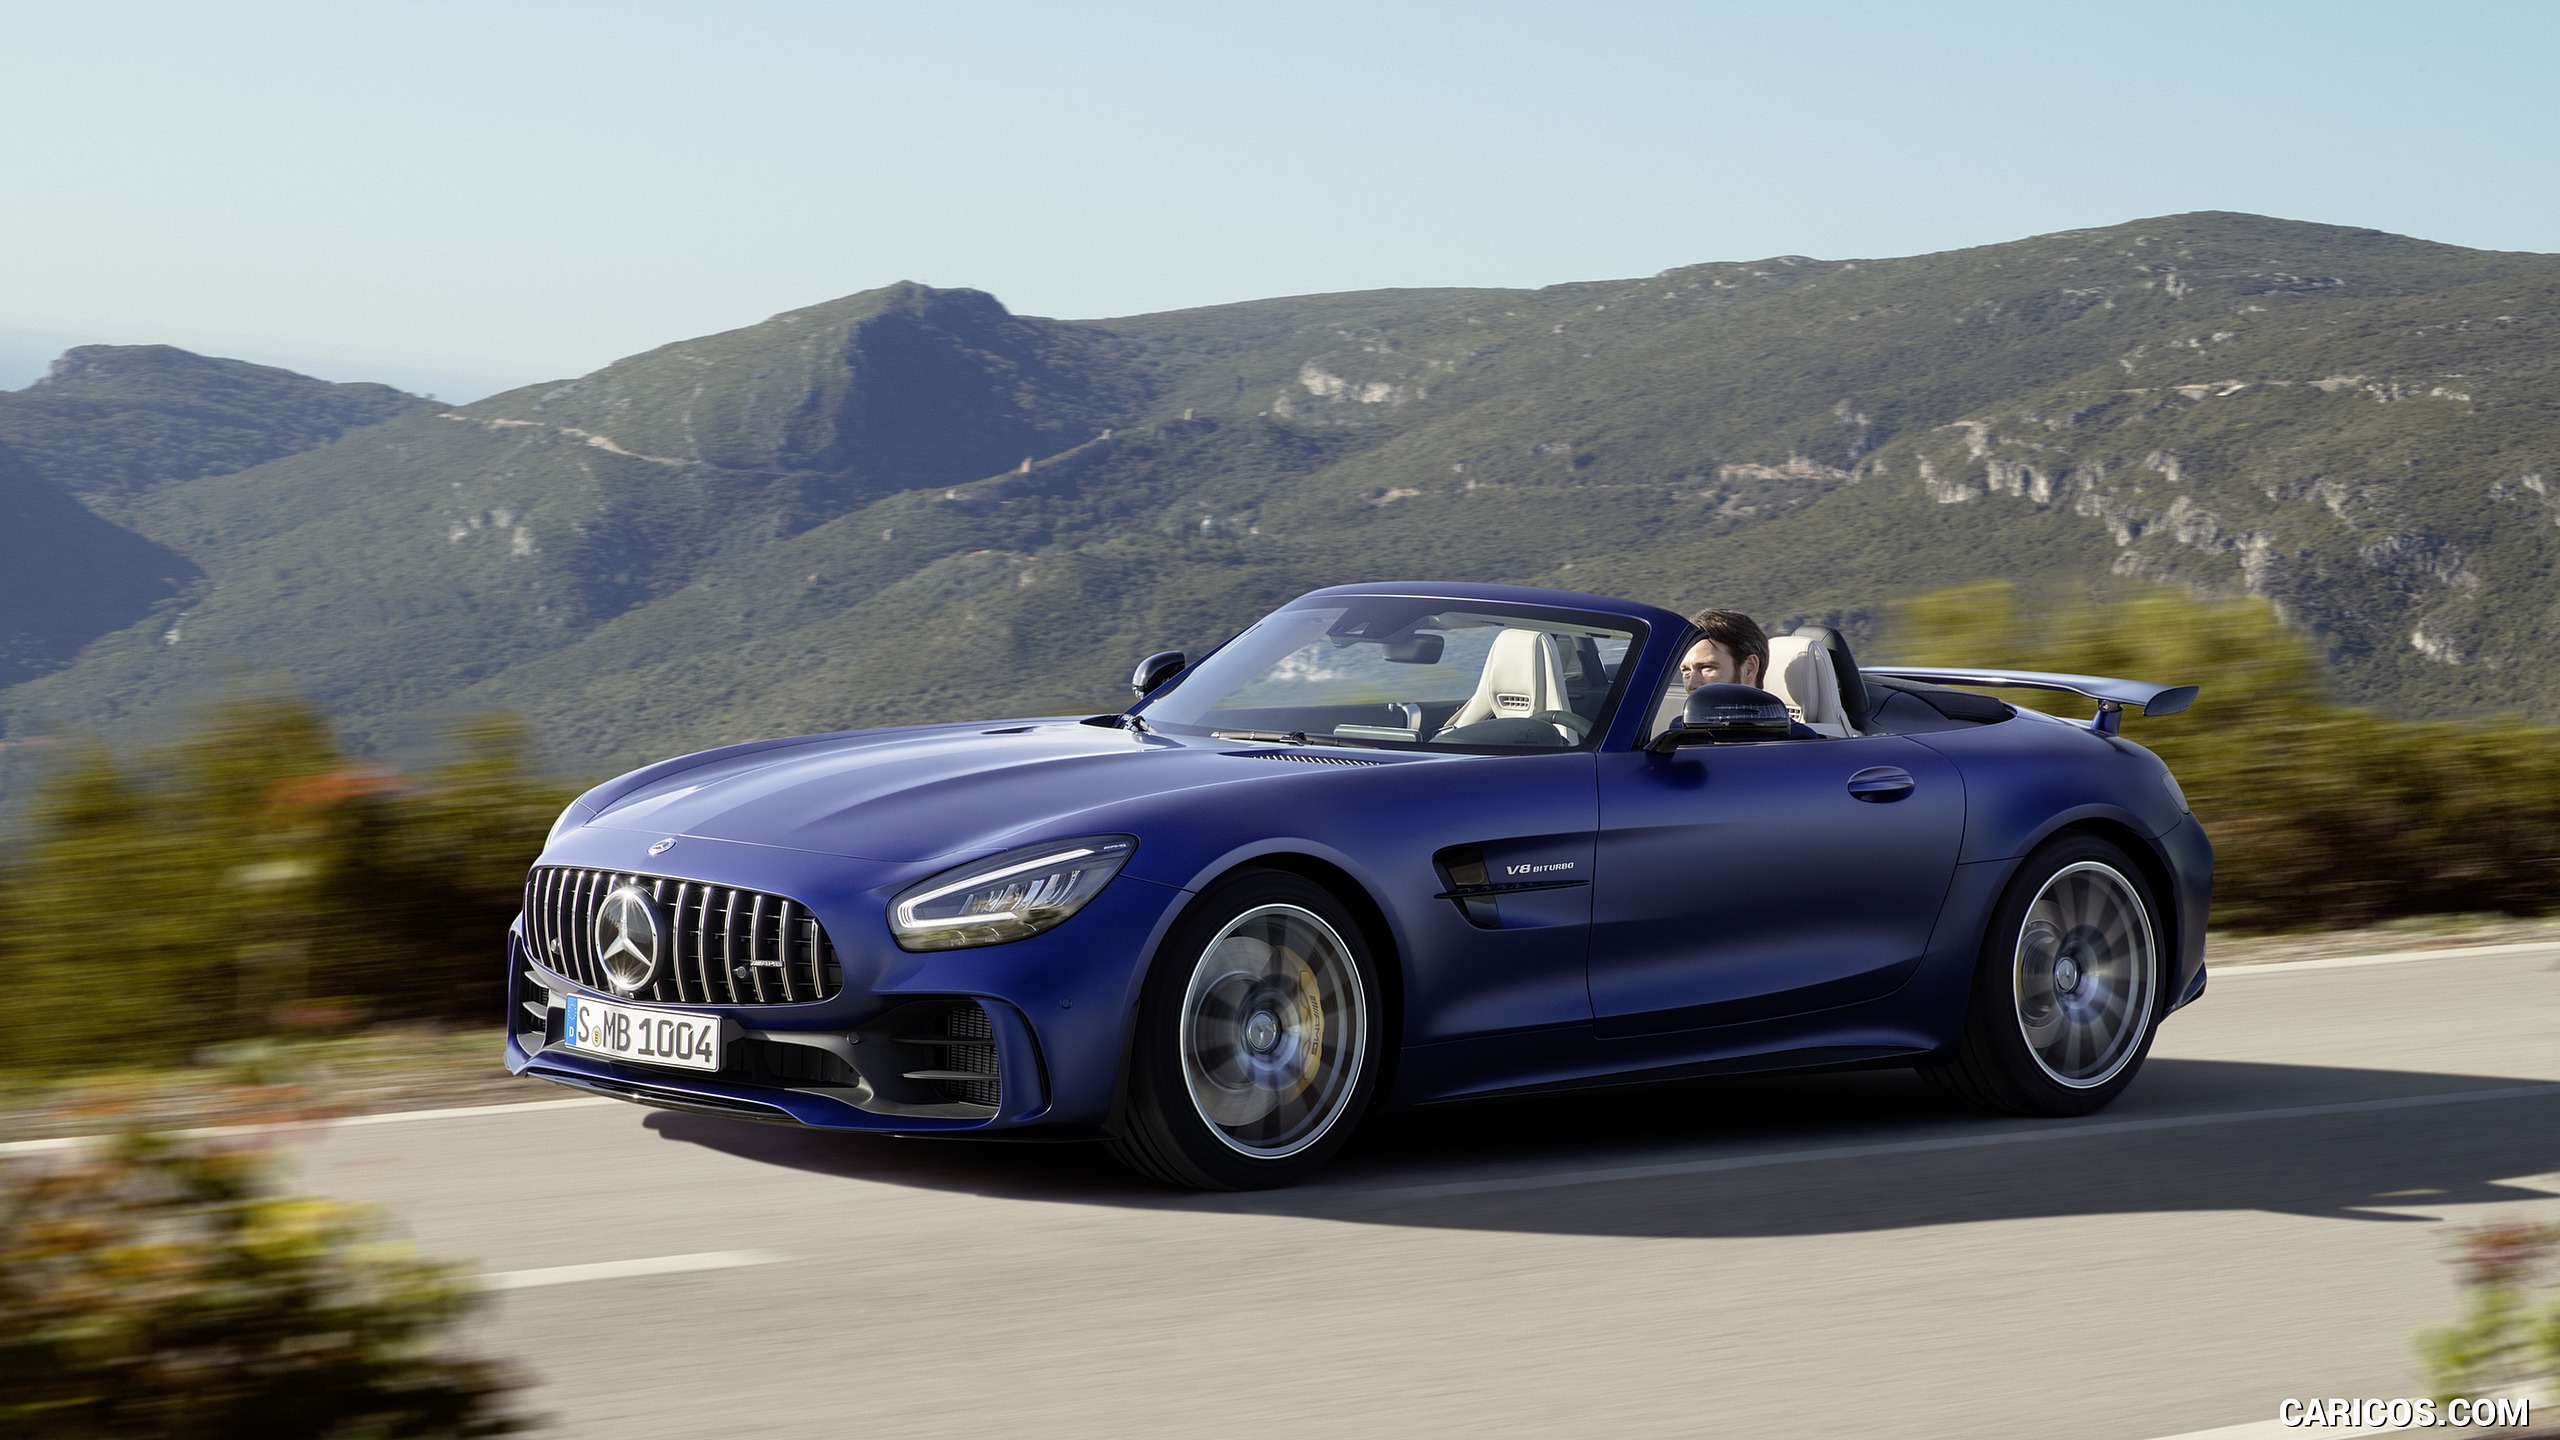 2020 Mercedes-AMG GT R Roadster - Front Three-Quarter, #2 of 246